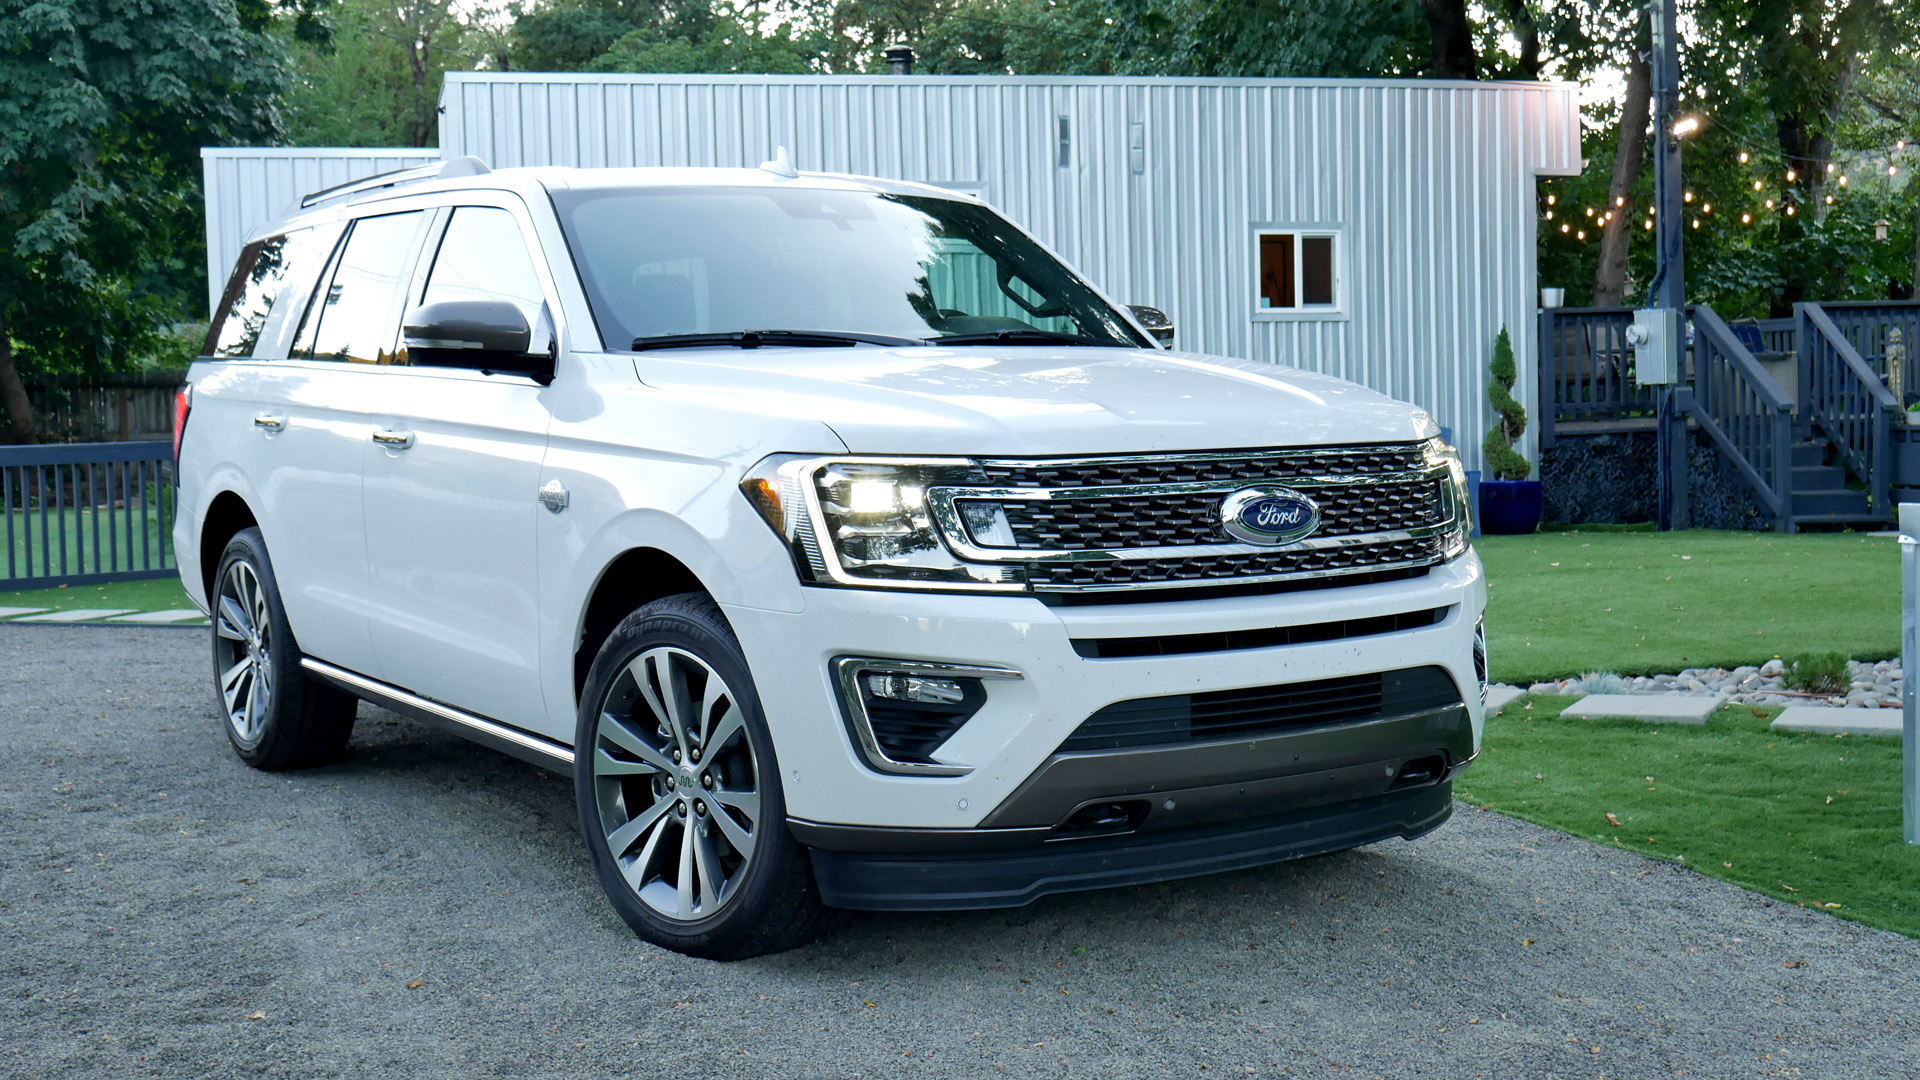 2021 Ford Expedition Review Price, specs, features and photos Autoblog